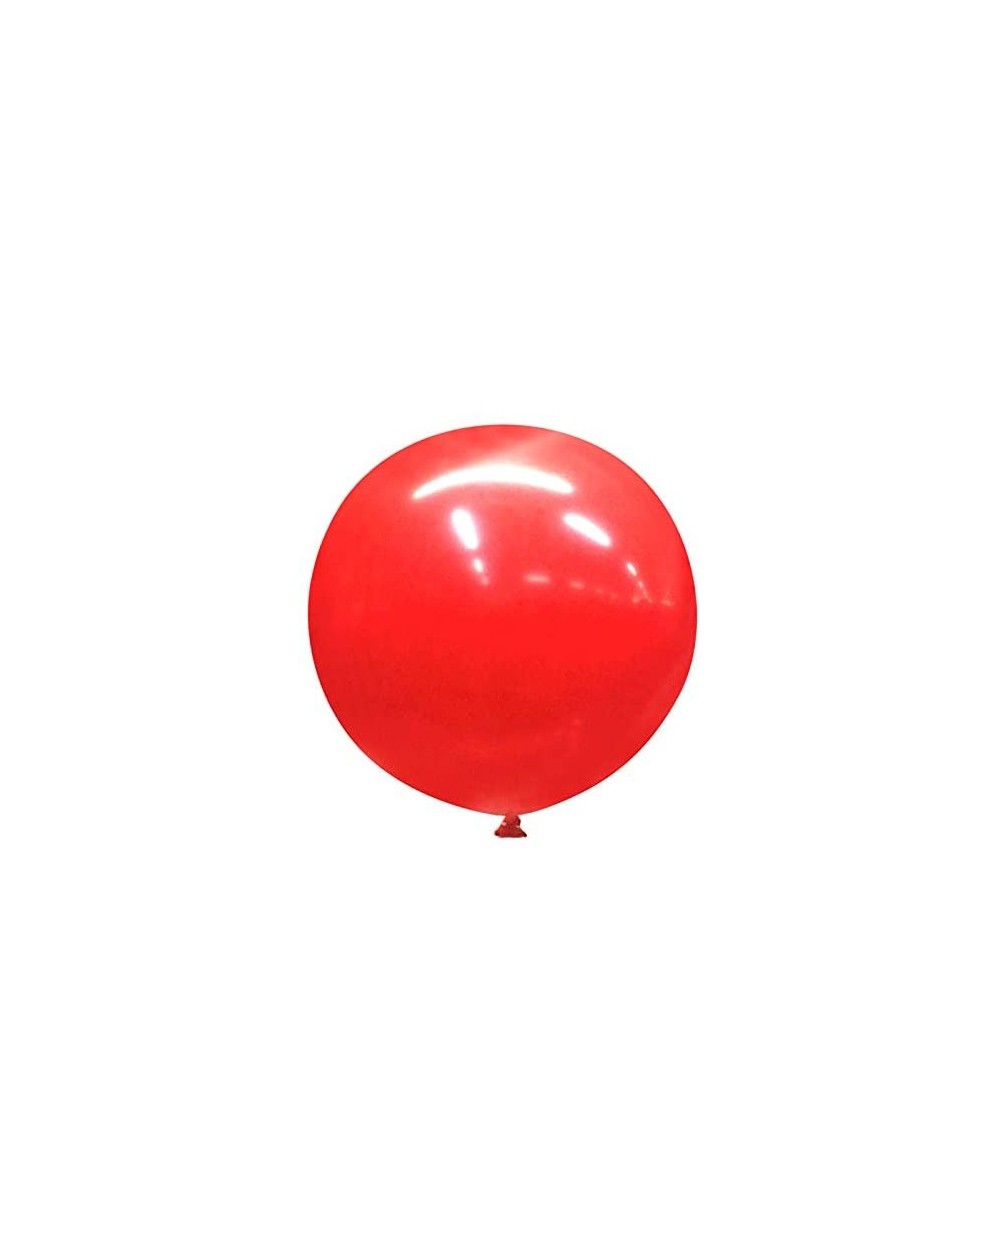 Balloons 36 Inch Giant Latex Balloons- Standard Red Round Balloons for Birthdays Weddings Receptions Festival Party Decoratio...